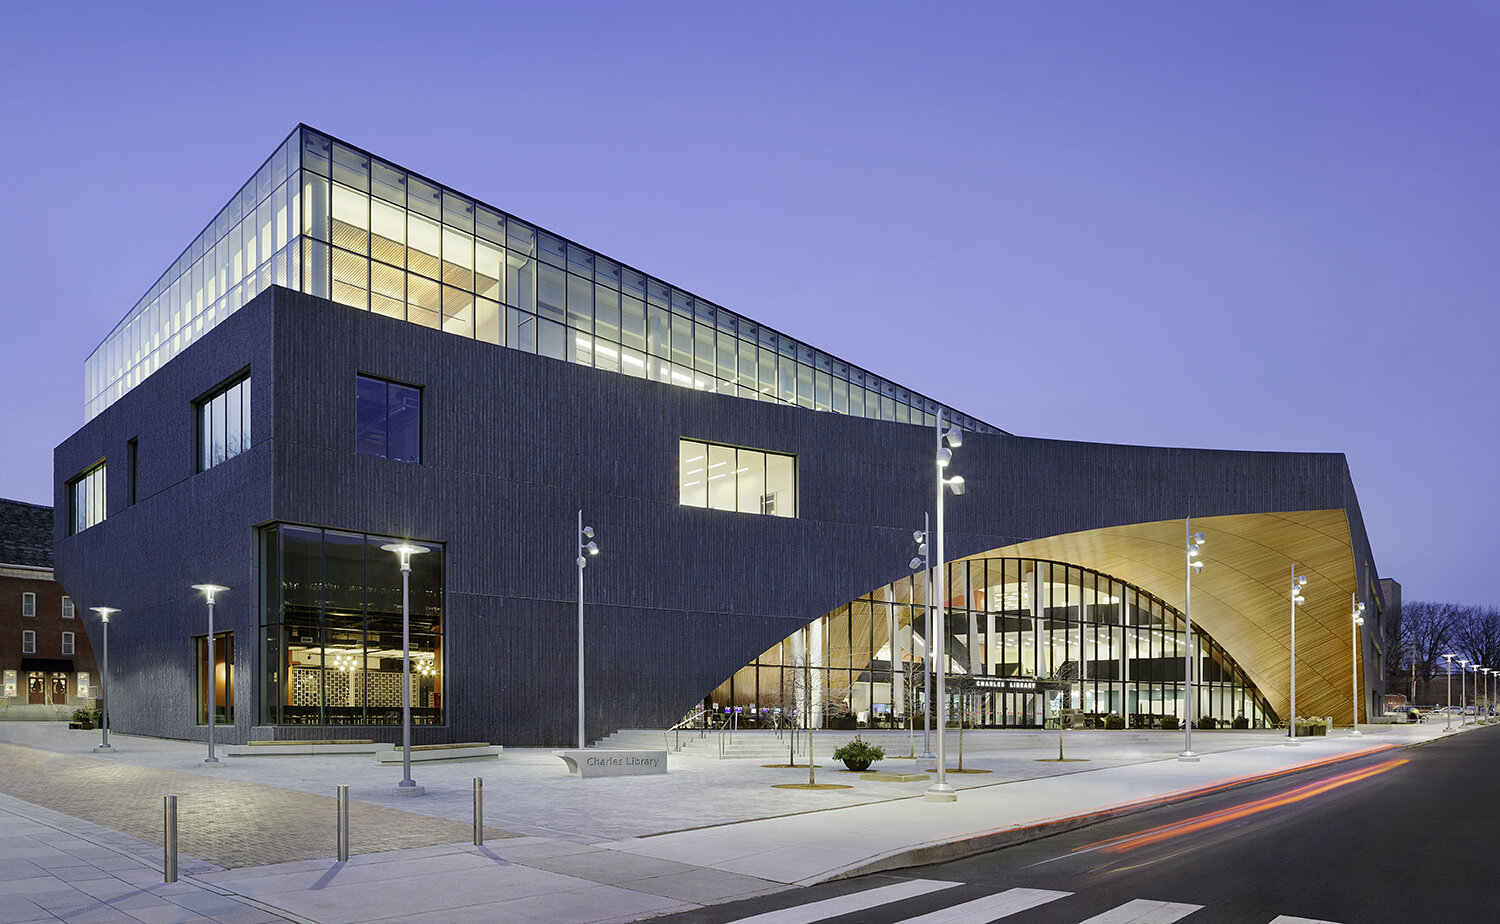 The Charles Library at Temple University. Designed by Snohetta A